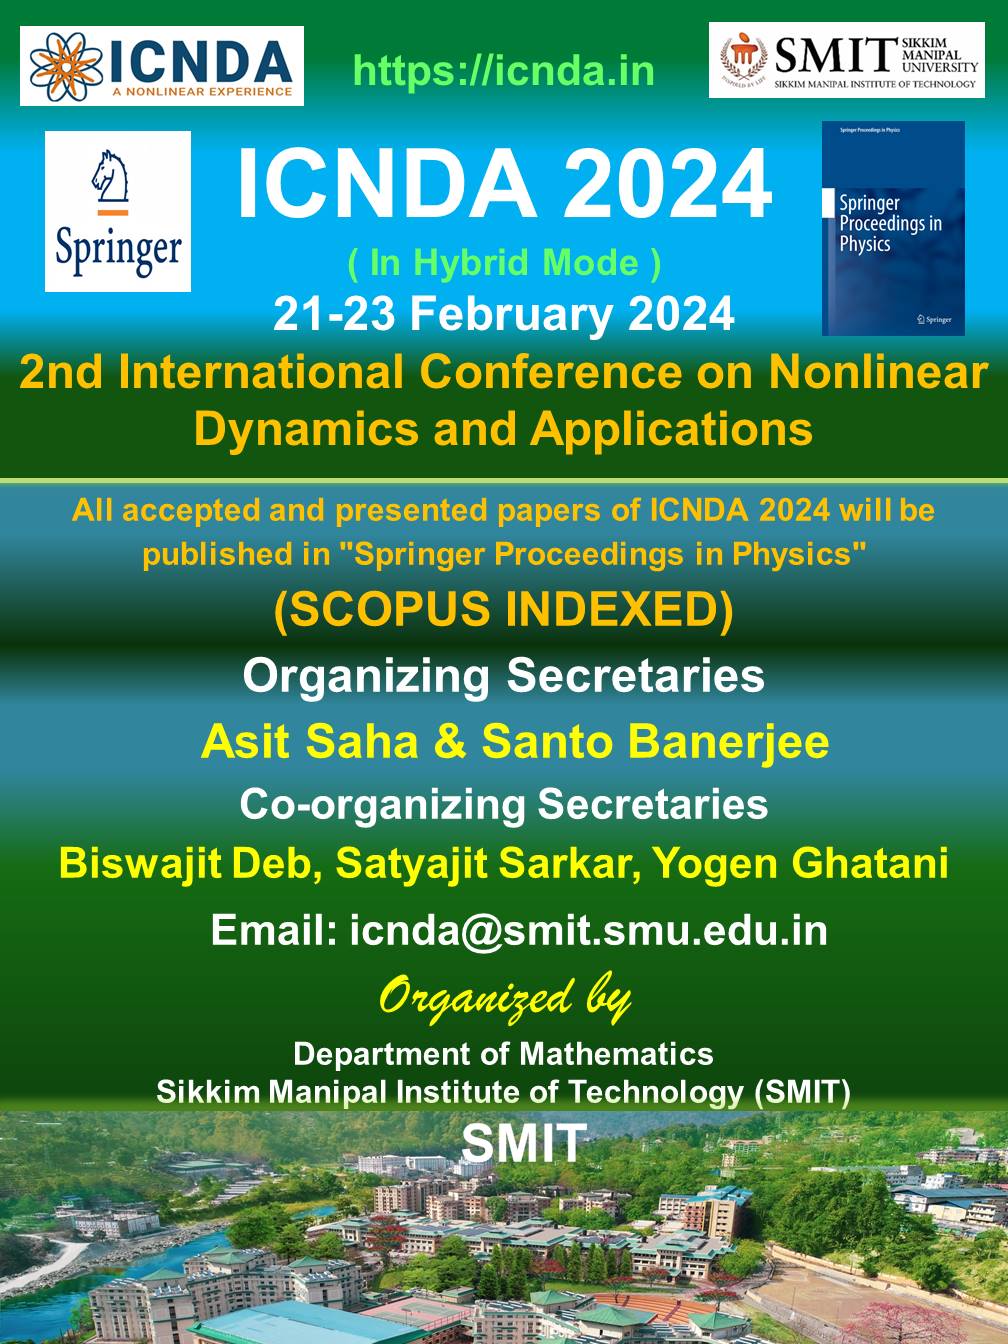 2nd International Conference on Nonlinear Dynamics and Applications (ICNDA 2024)